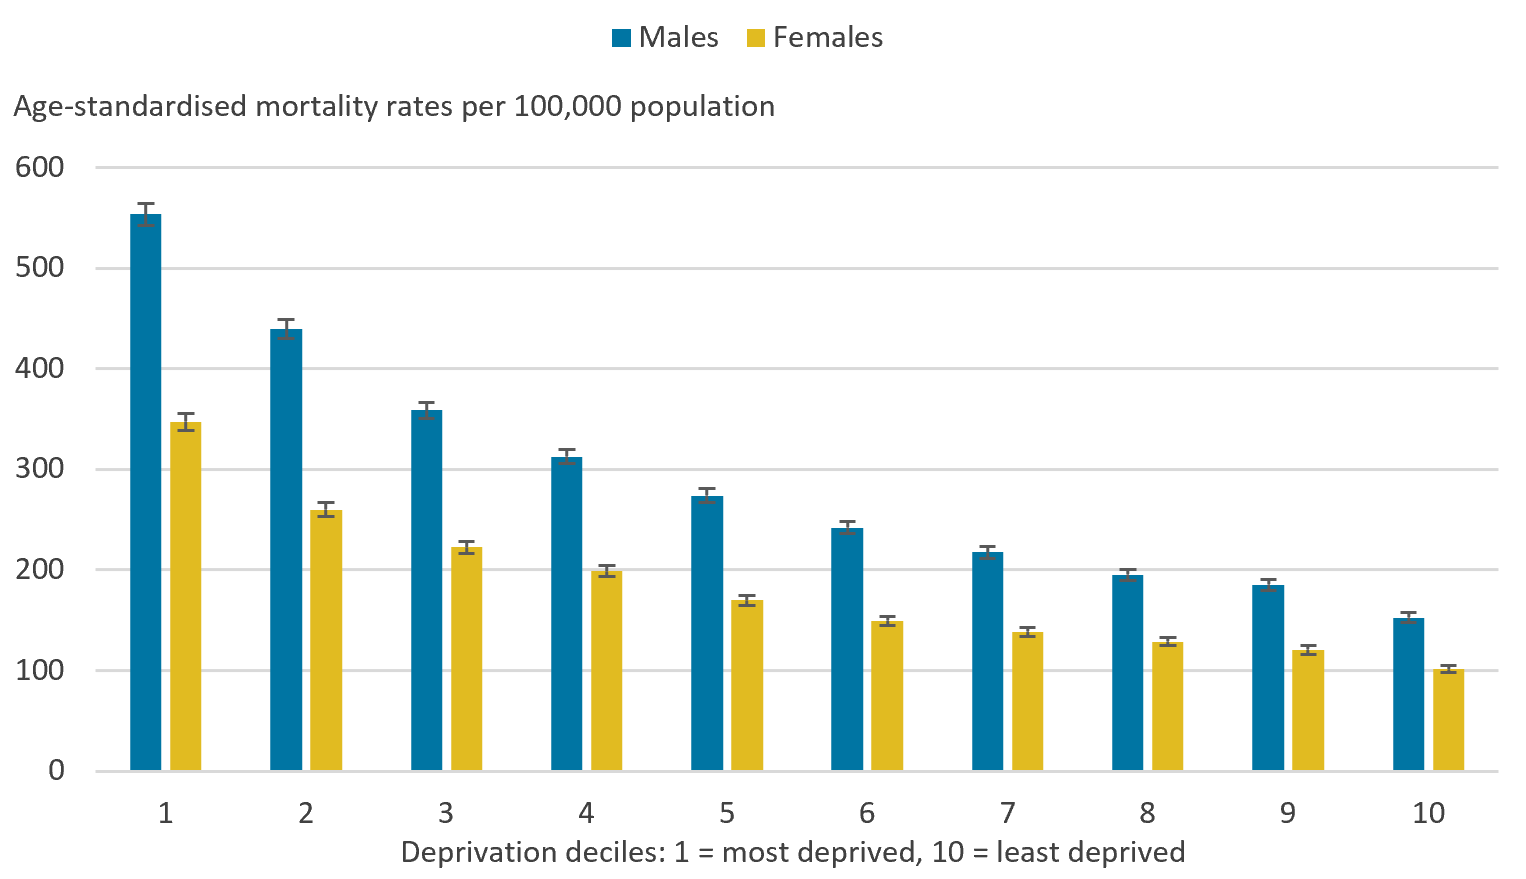 Males and females living in the most deprived areas had statistically significant higher avoidable mortality rates than those living in the least deprived areas.